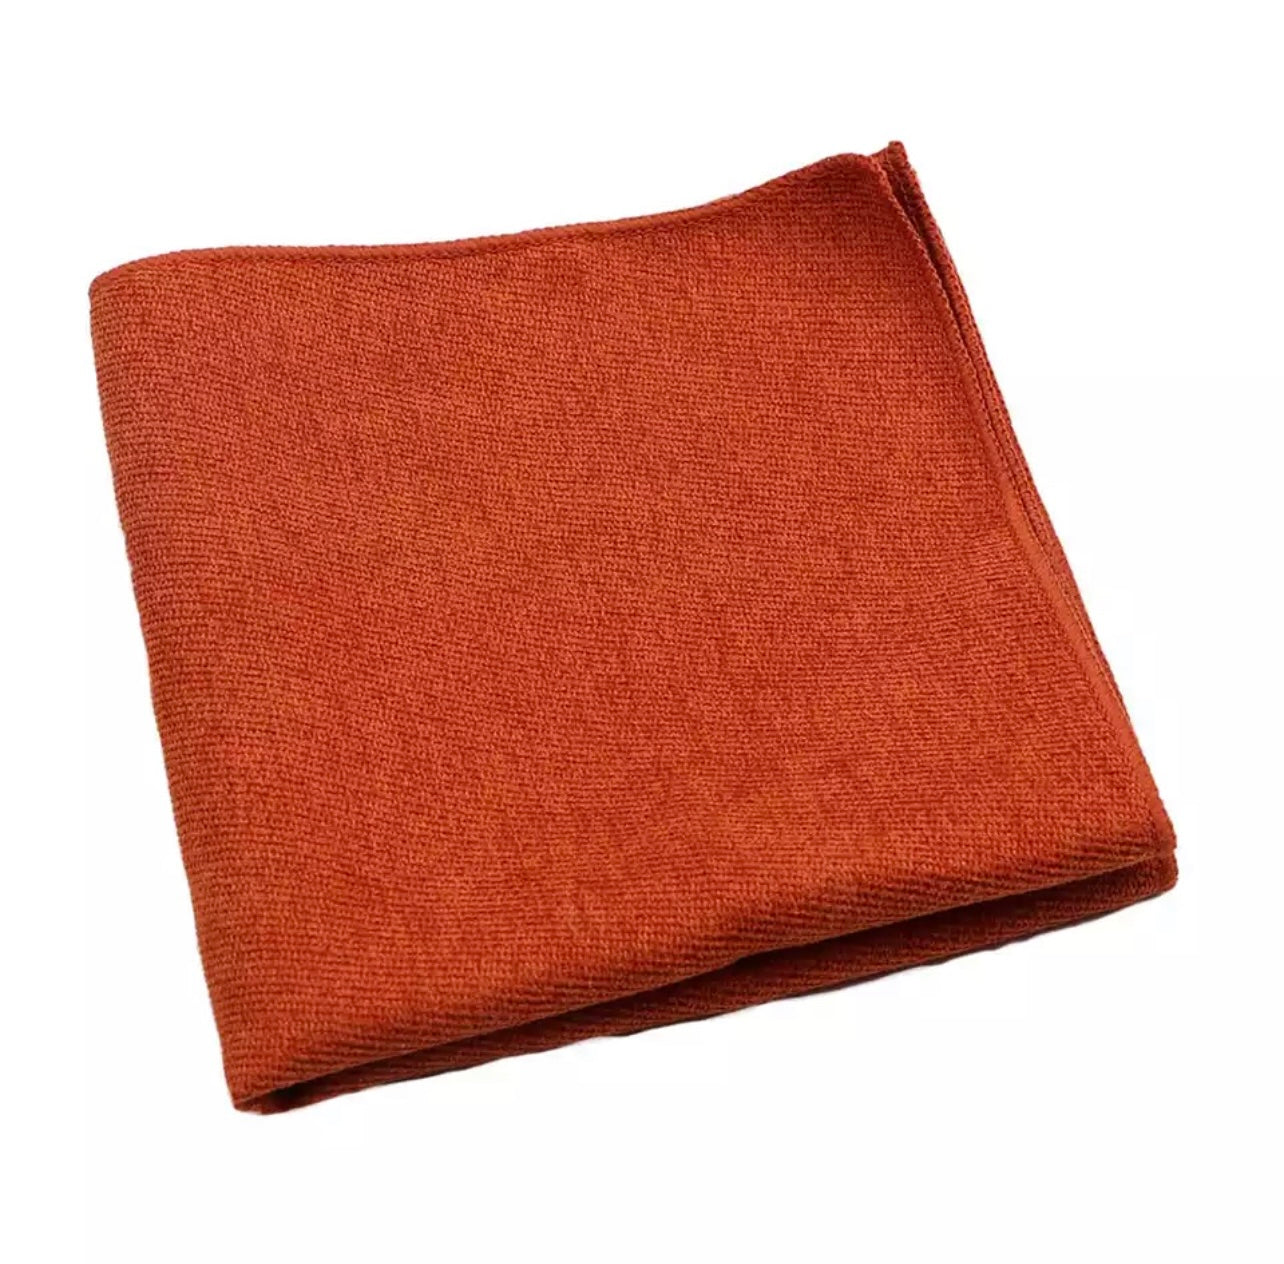 Terracotta Rust Pocket Square SAFFRON Mytieshop Terracotta Rust Pocket Square Material SuedeItem Length: 23 cm ( 9 inches)Item Width : 22 cm (8.6 inches) Color: Red Orange Elevate your style with a touch of SAFFRON. Inspired by the natural beauty of the saffron flower, this pocket square is the perfect way to add a touch of luxury to your outfit. With its rich, earthy colors, it&#39;s perfect for any formal or special occasion. Made from 100% silk, this pocket square is a luxurious addition to your 